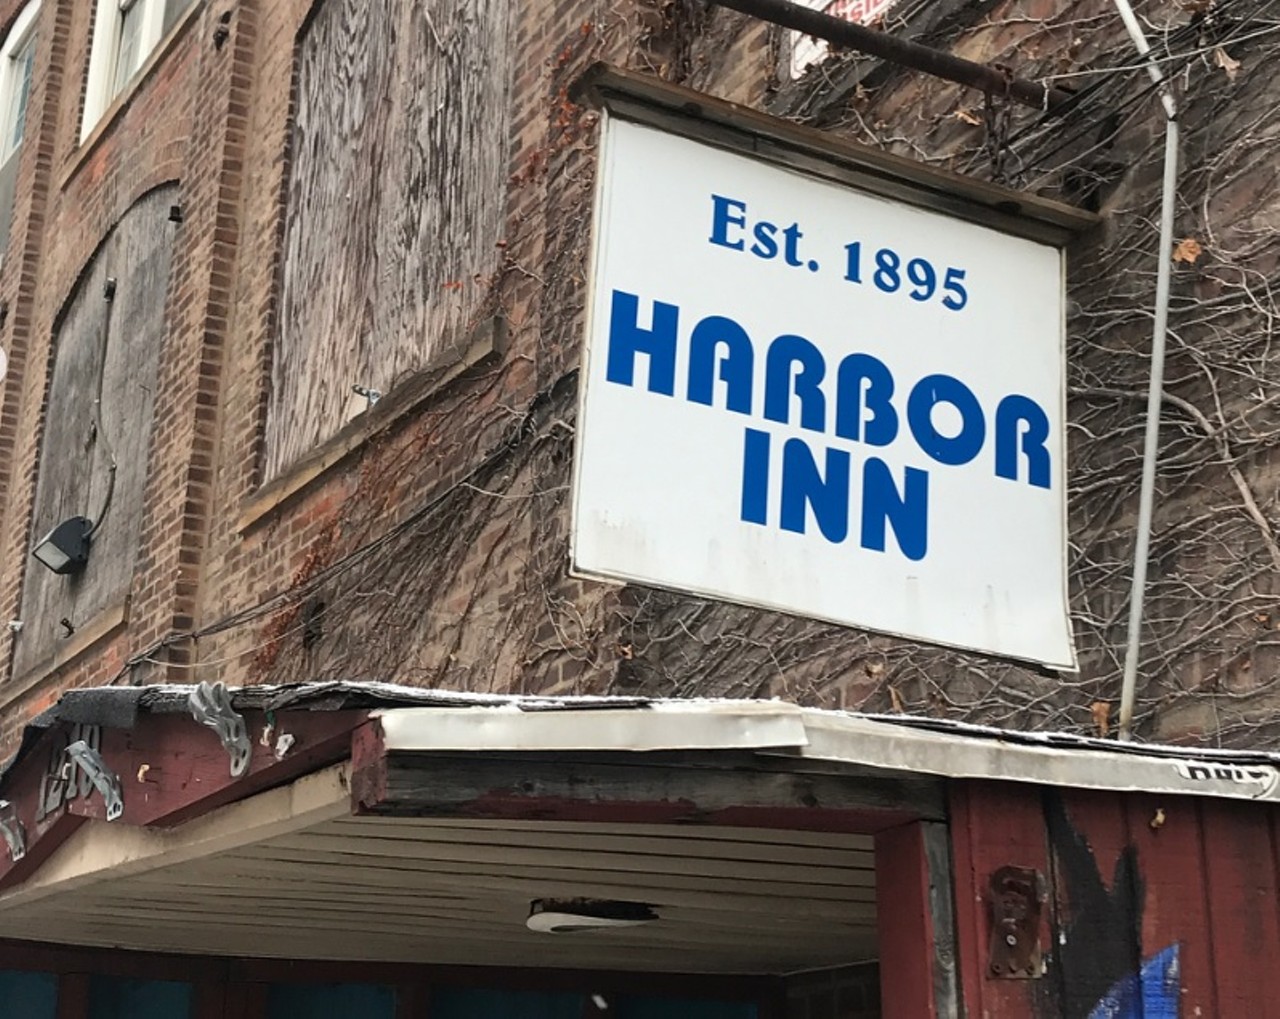 Harbor Inn
1219 Main Ave., 216-241-3232
Open since 1895, Harbor Inn is the oldest continuously operating bar in Cleveland. You can grab a shot and a beer there on the Flats West Bank. 
Photo via rchillman/Instagram